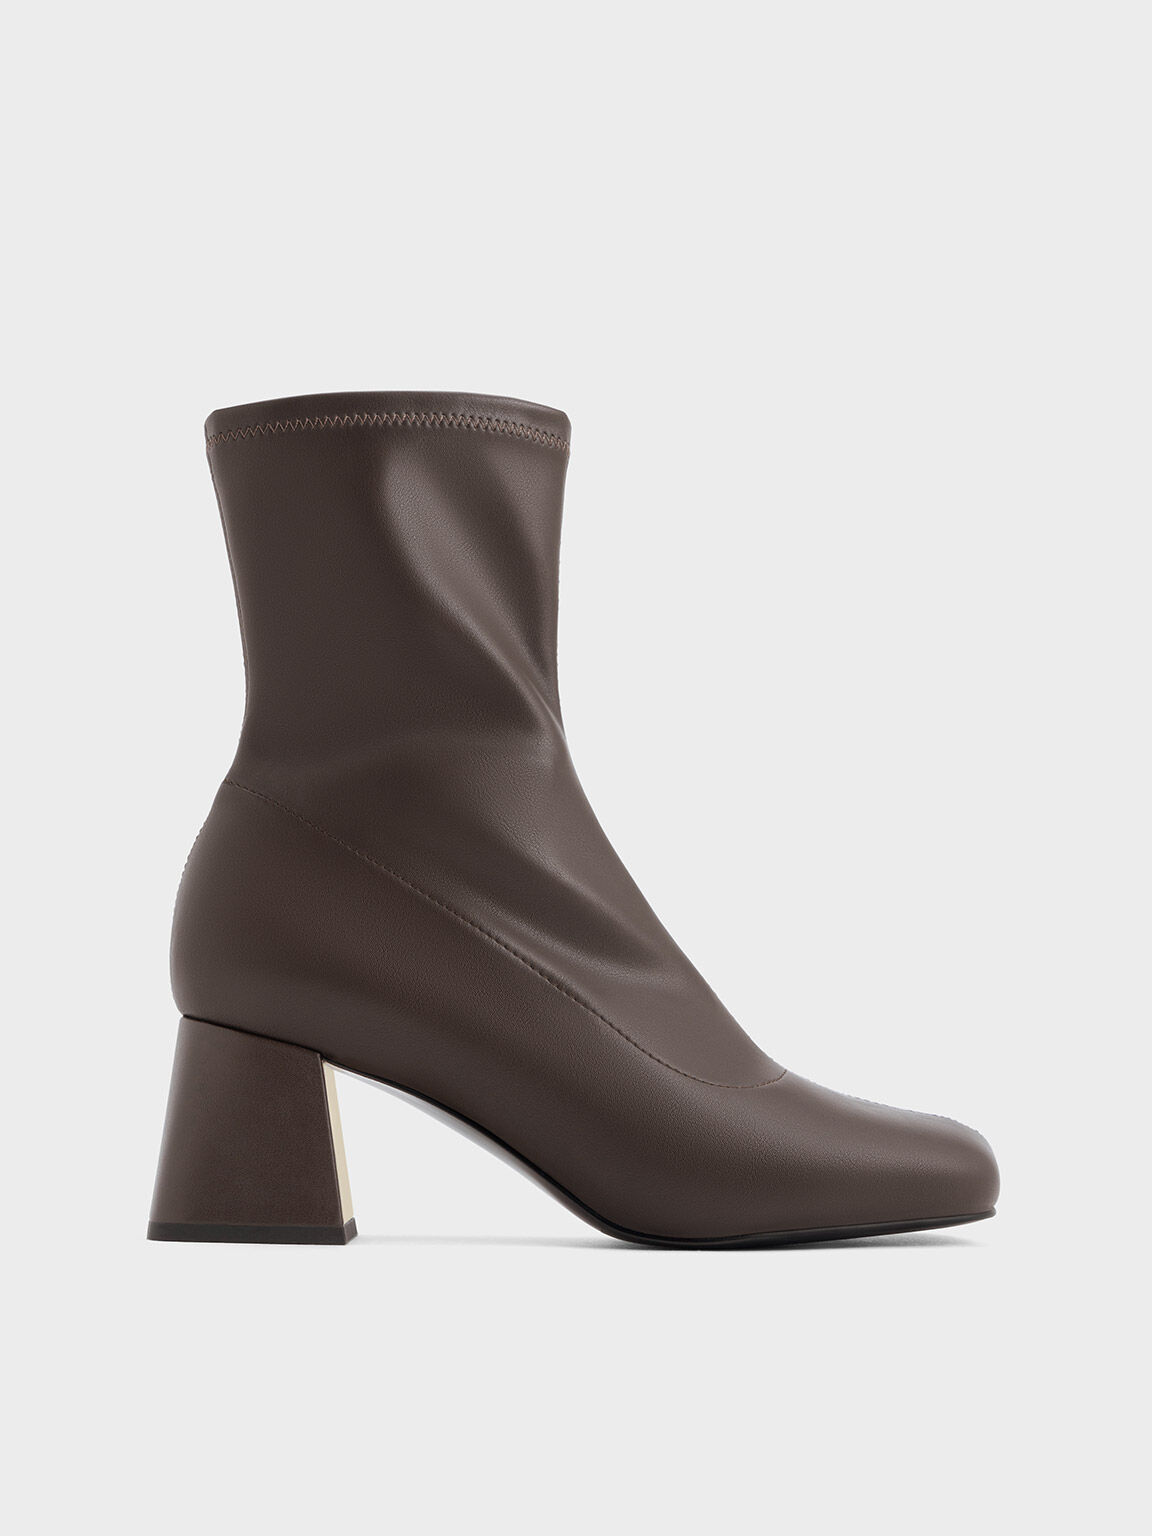 Women's Boots | Shop Exclusive Styles | CHARLES & KEITH SA